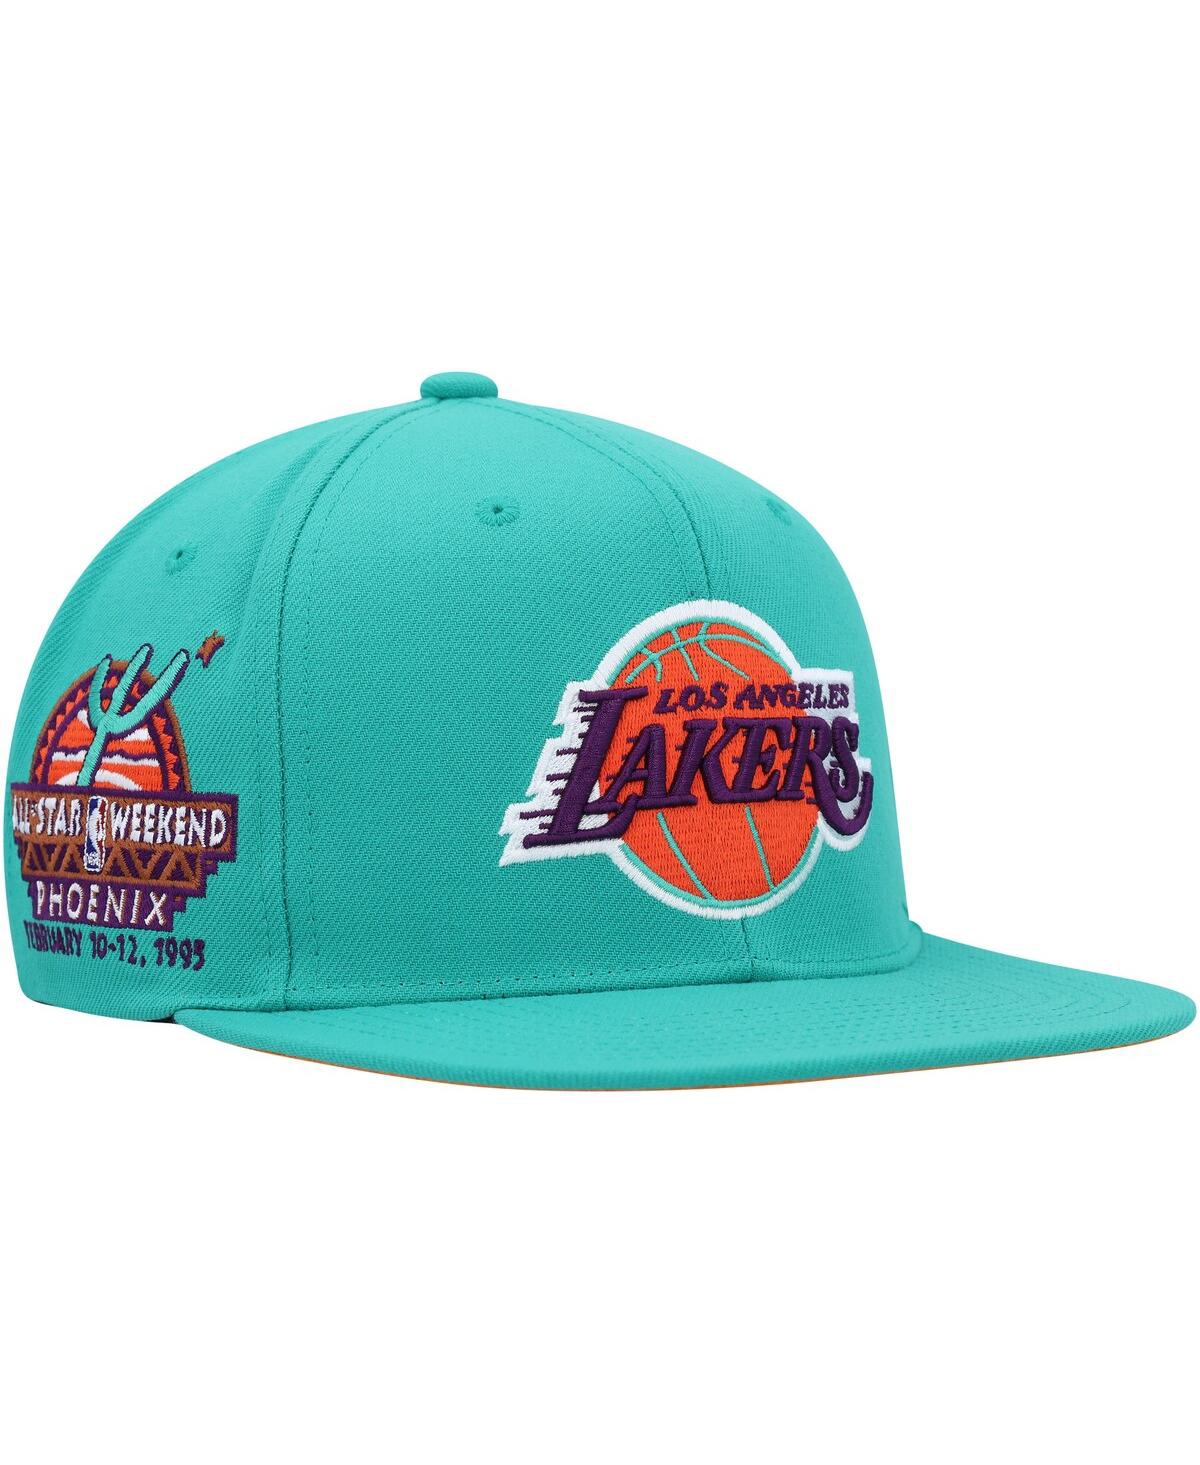 MITCHELL & NESS MEN'S MITCHELL & NESS TURQUOISE LOS ANGELES LAKERS HARDWOOD CLASSICS 1995 NBA ALL-STAR WEEKEND DESER